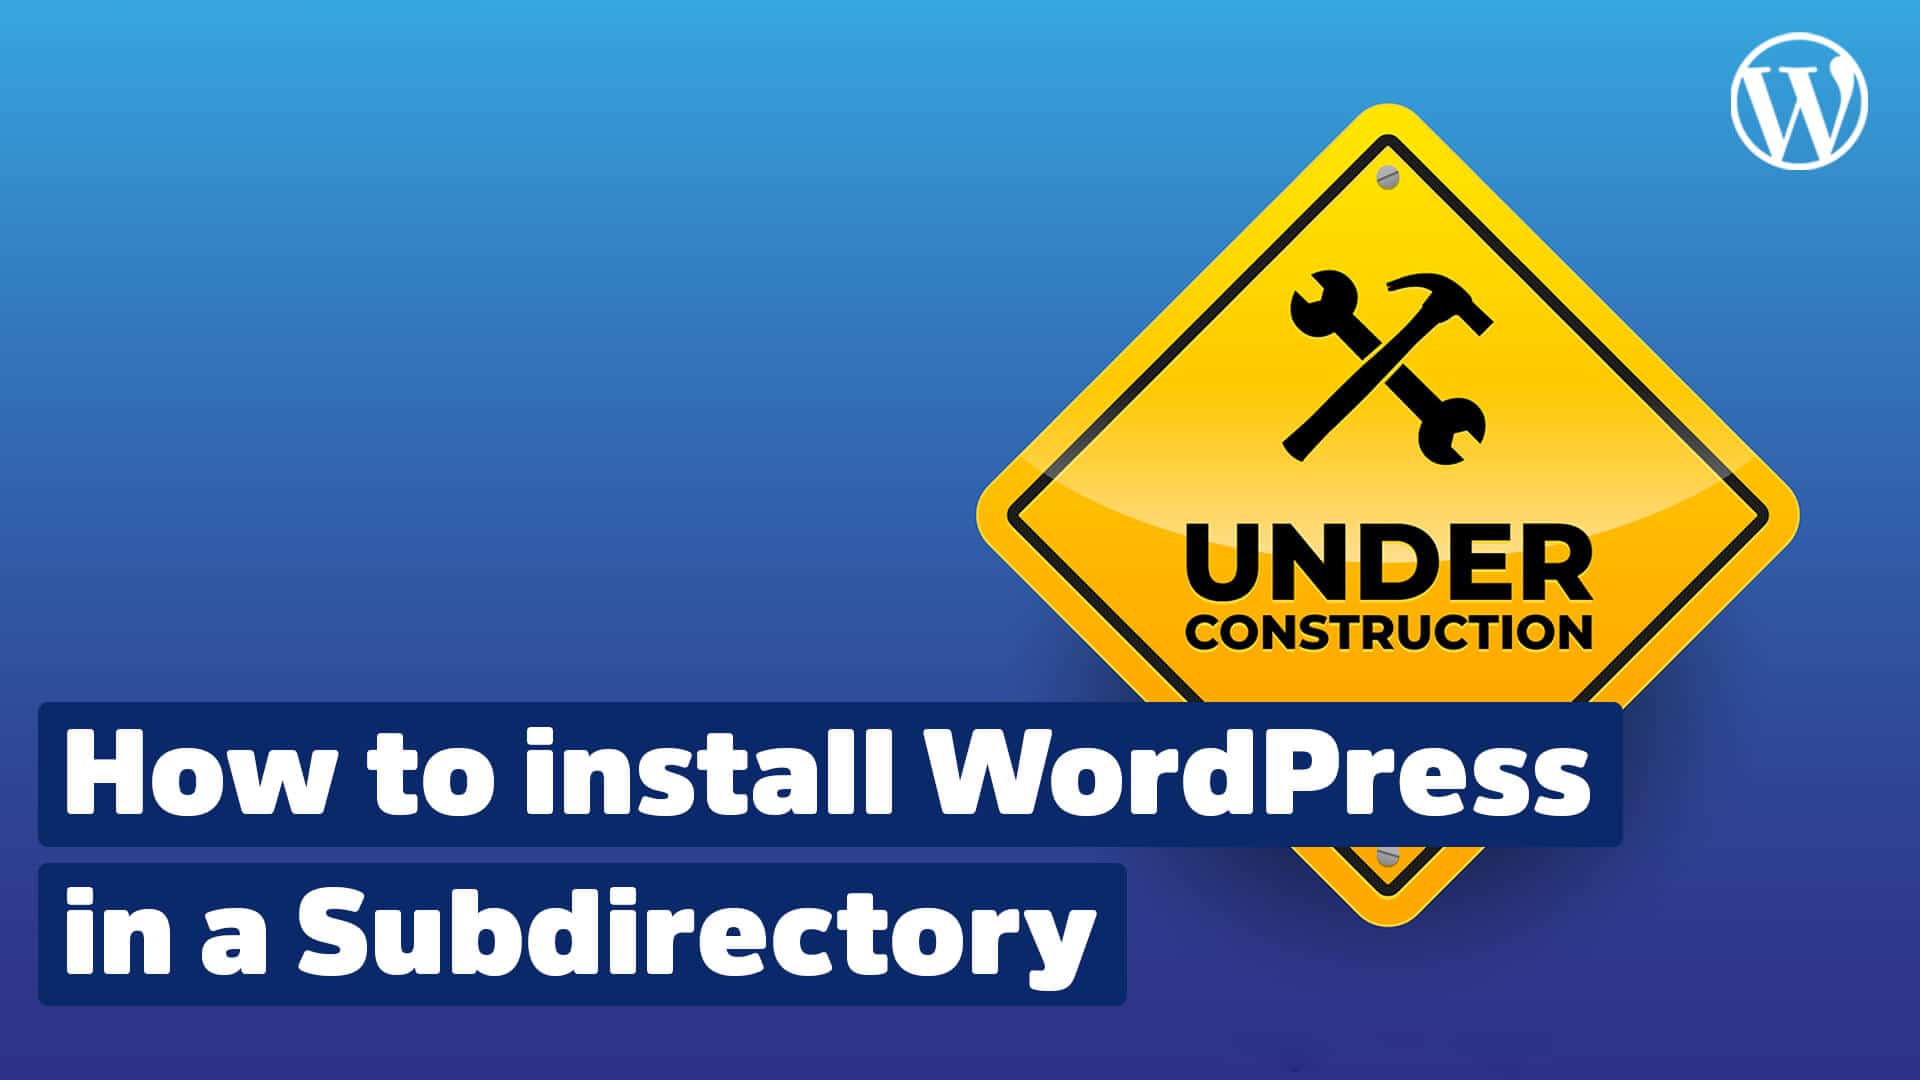 How to install WordPress in a subdirectory